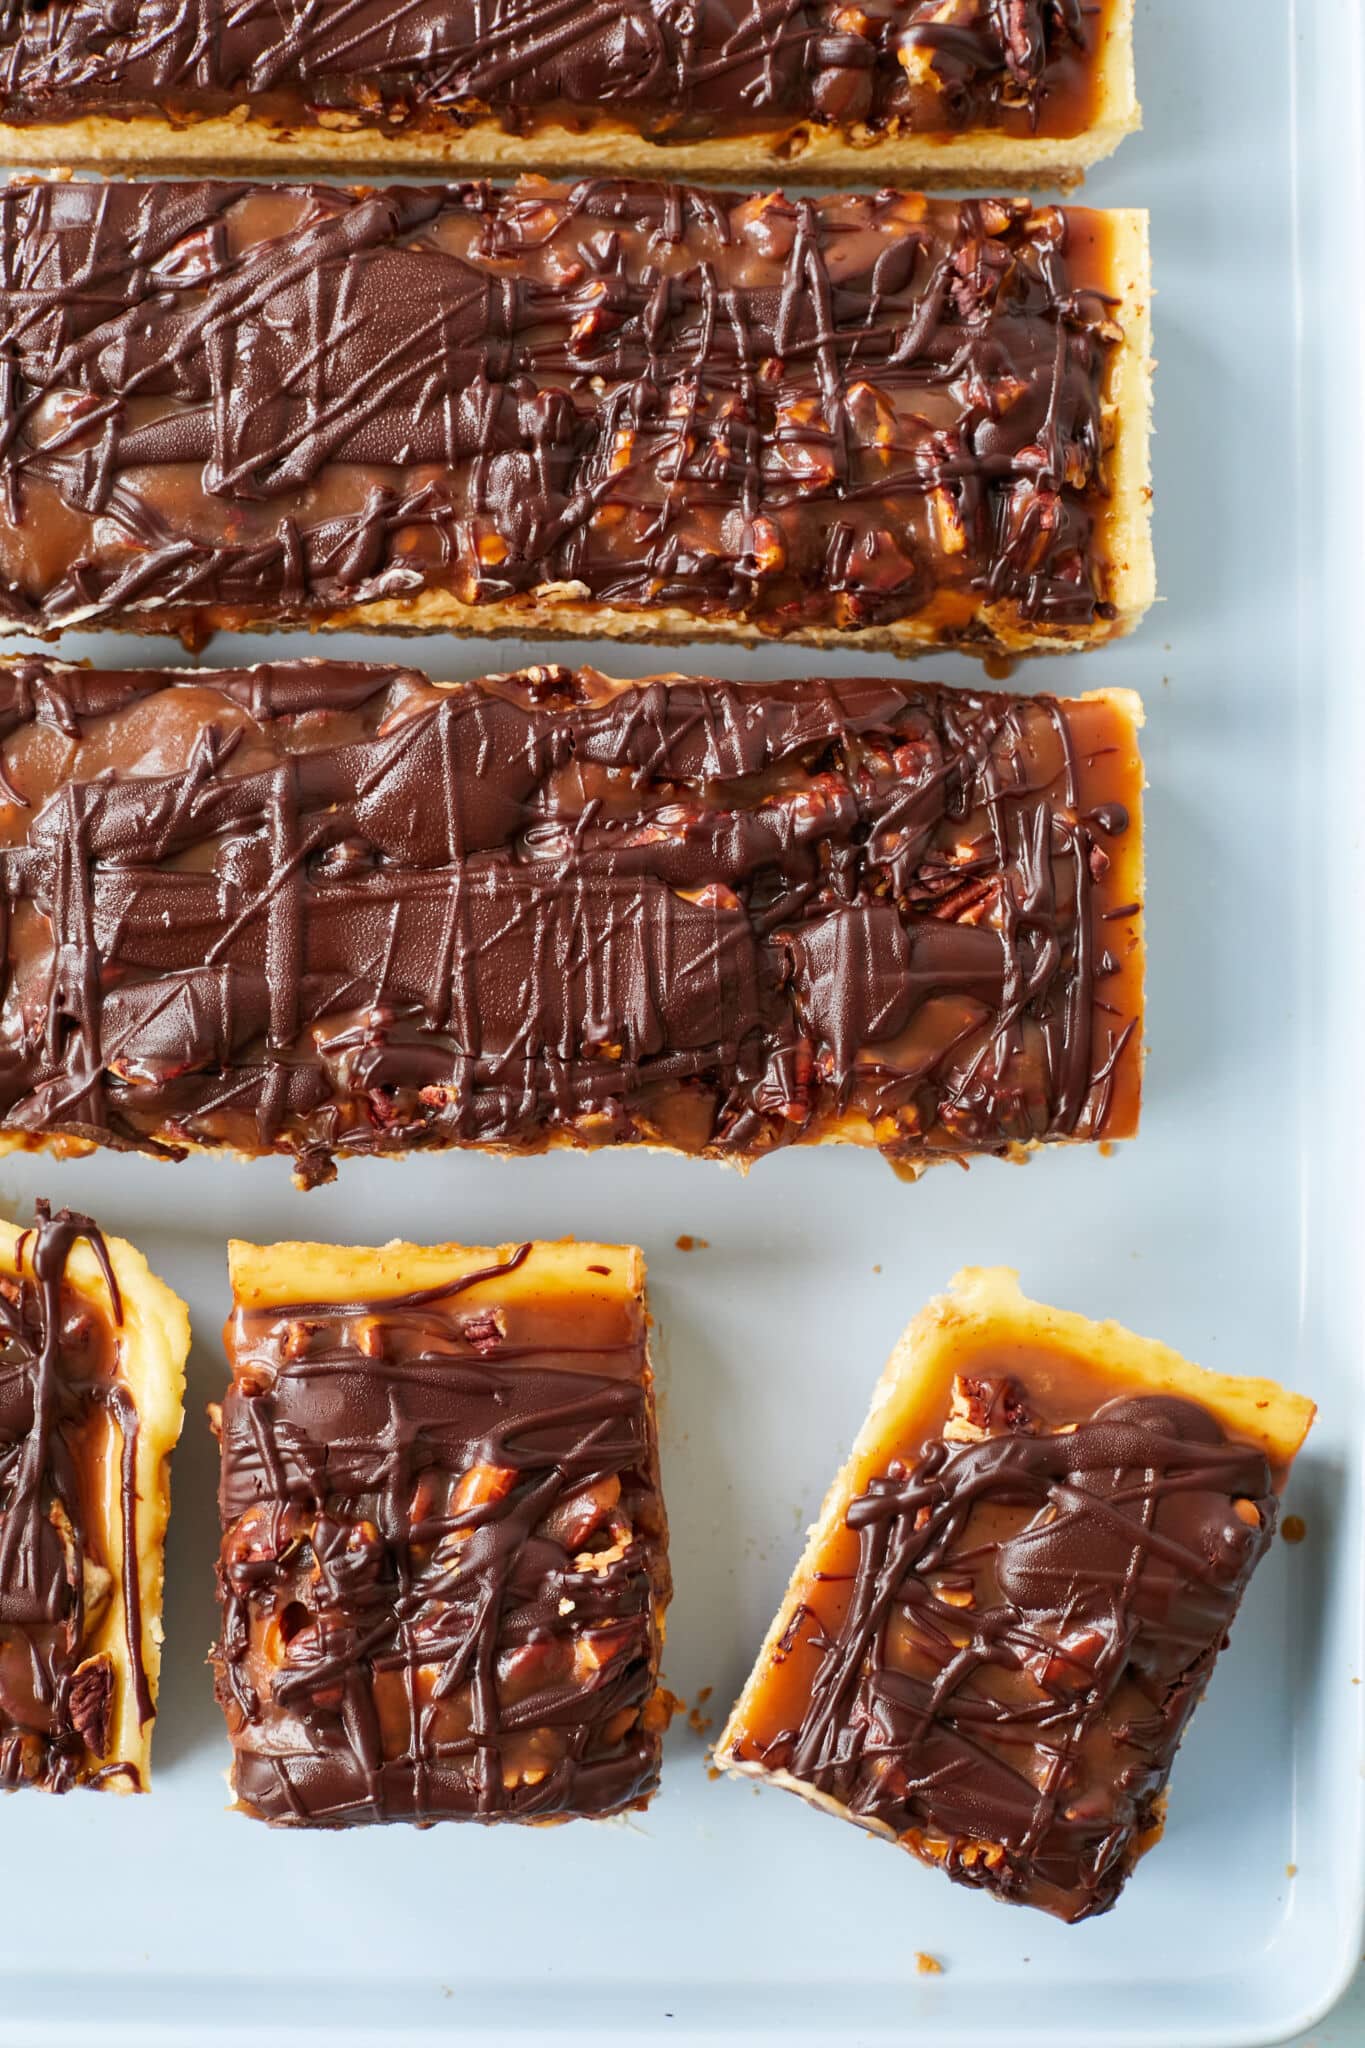 Turtle Cheesecake Bars are baked and cut into strips and squares in a light blue baking pan. An overhead shot shows the buttery caramel, nuts, and decadent chocolate ganache.